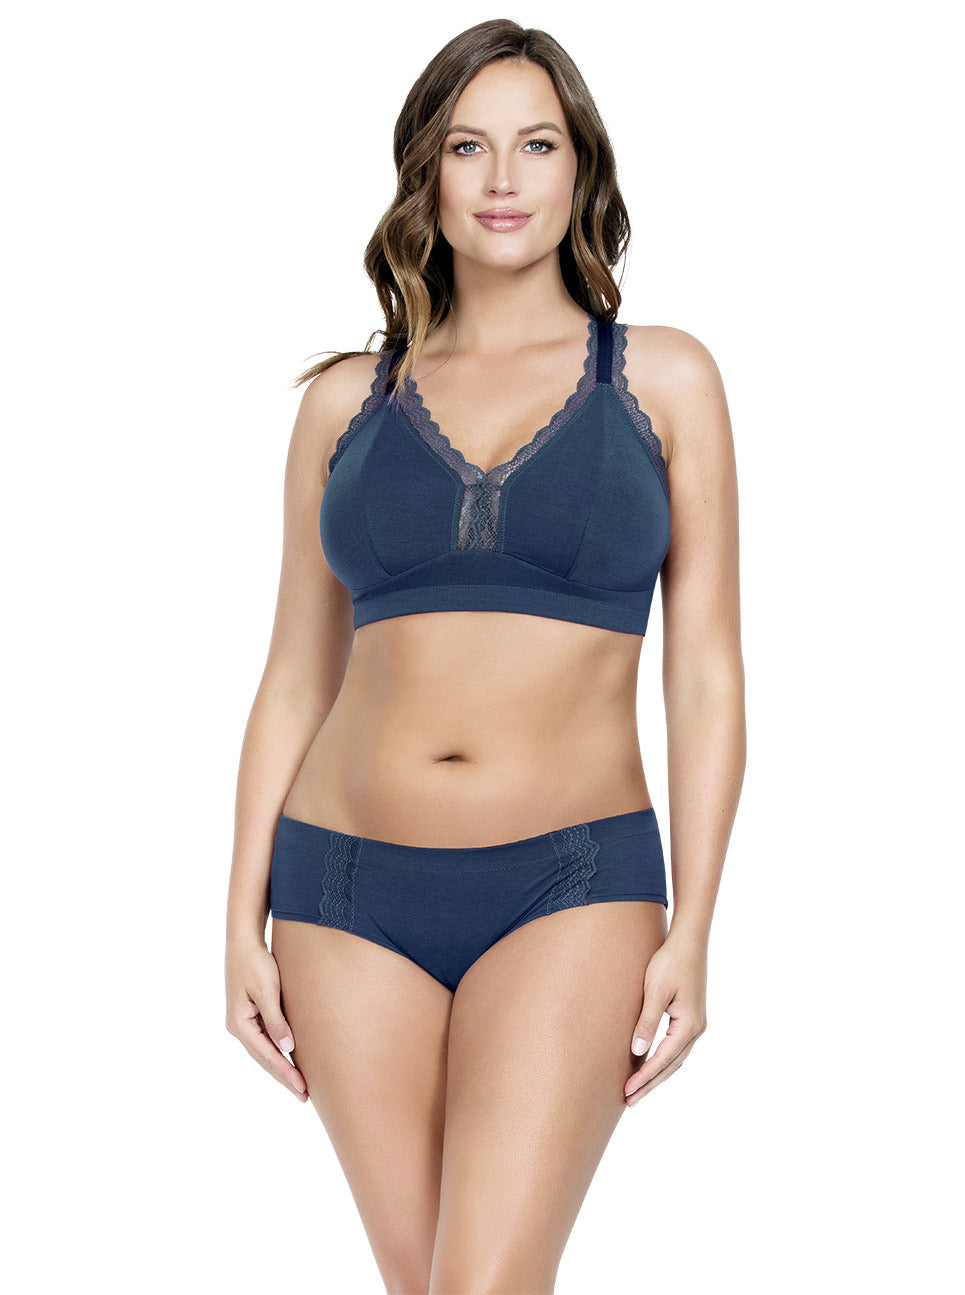 Seamless Plus Size Bralette Set With Low Waist Clovia Bra Panty Wire Free  Cotton Lingerie For Women From Micandy, $6.2